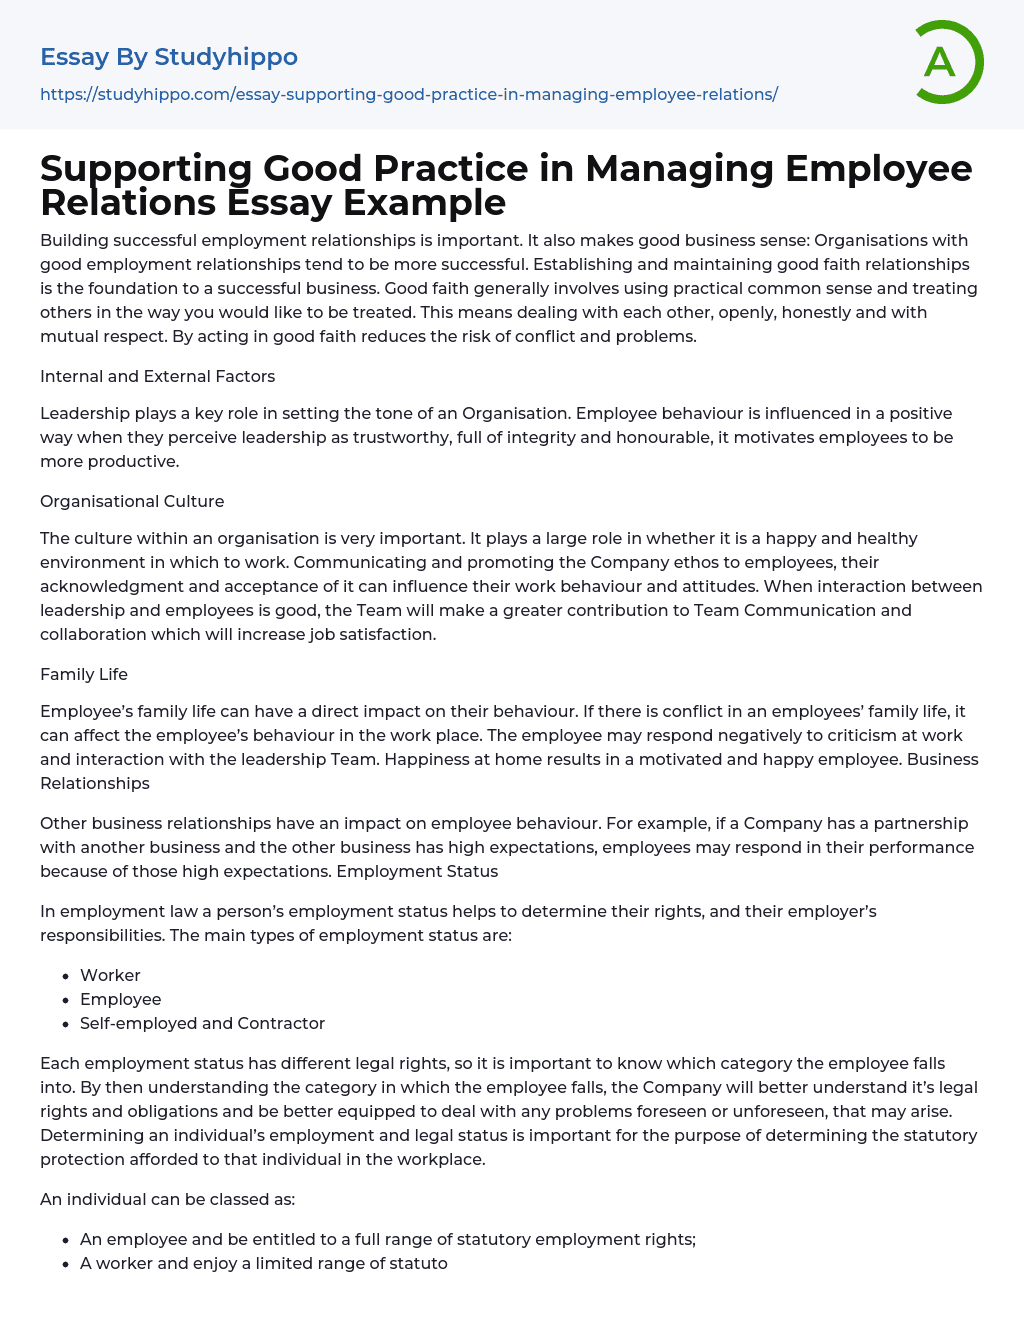 Supporting Good Practice in Managing Employee Relations Essay Example